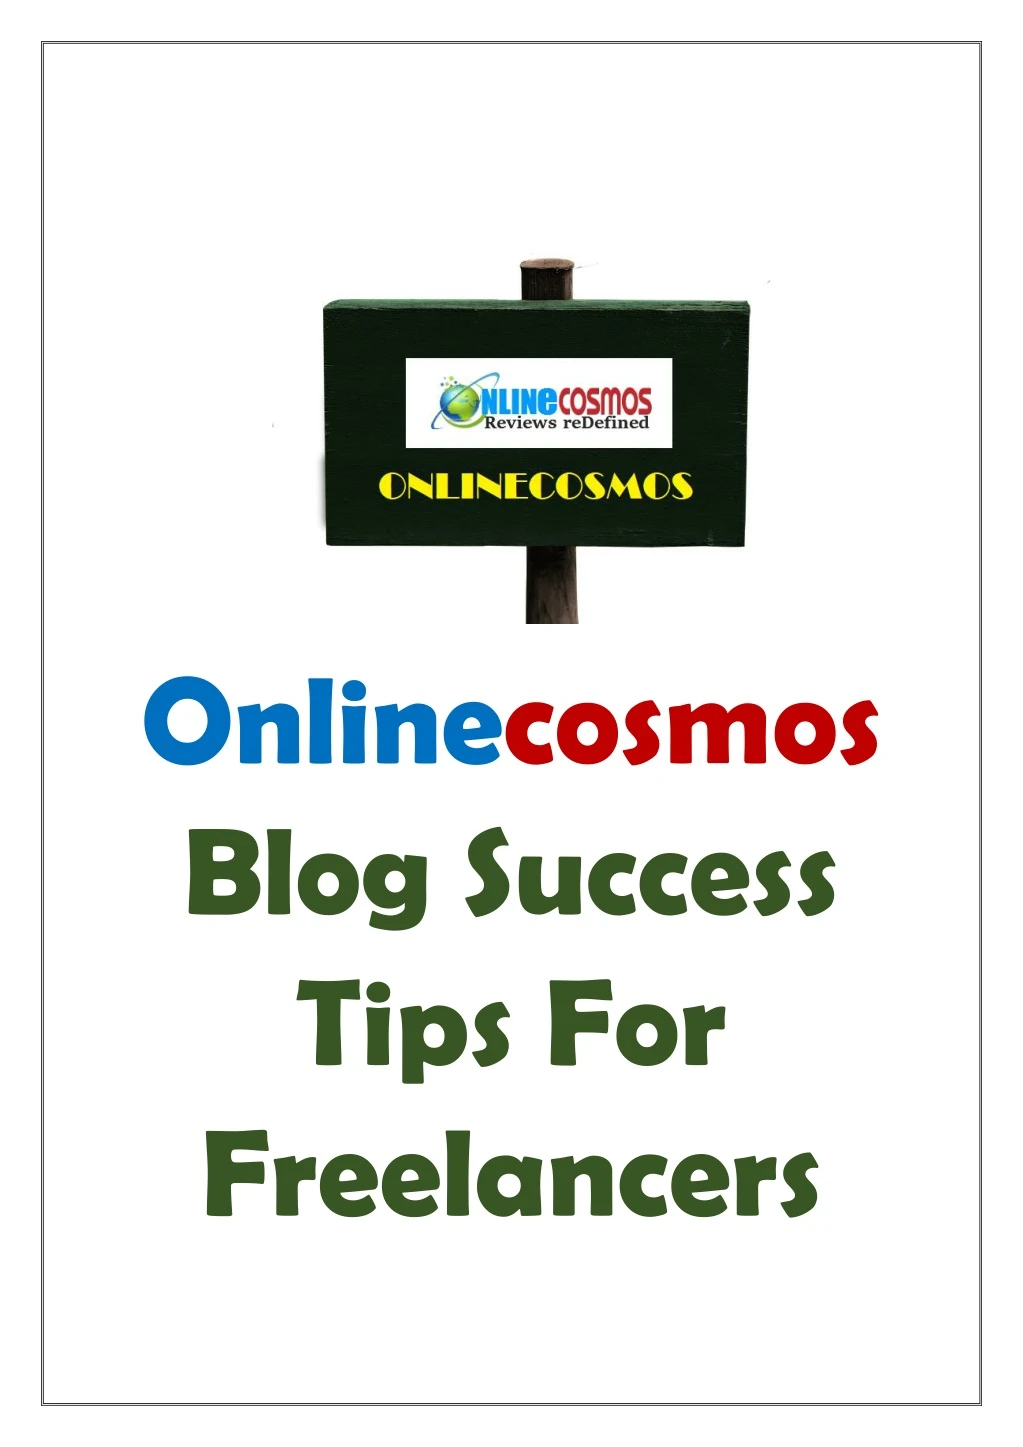 onlinecosmos blog success tips for freelancers